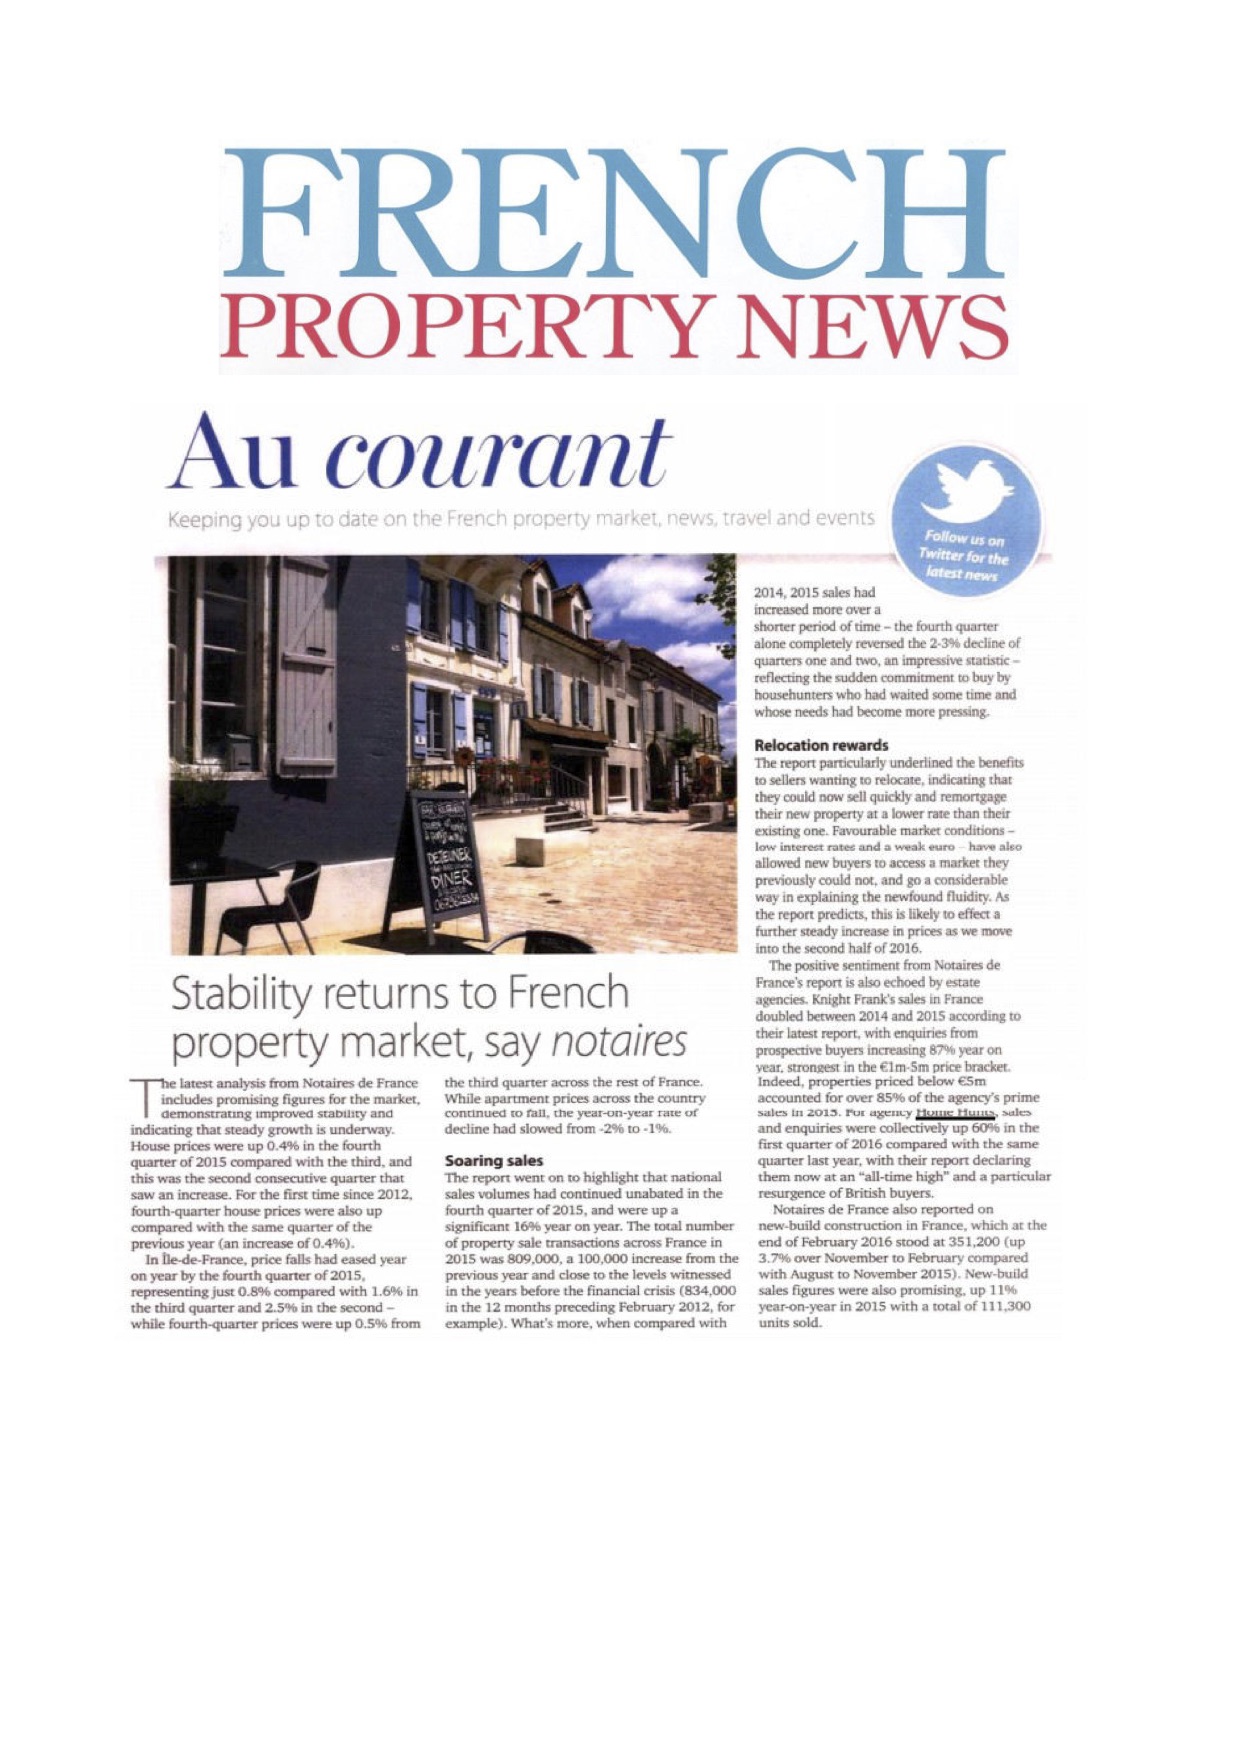 French property news – Stability returns to French property market